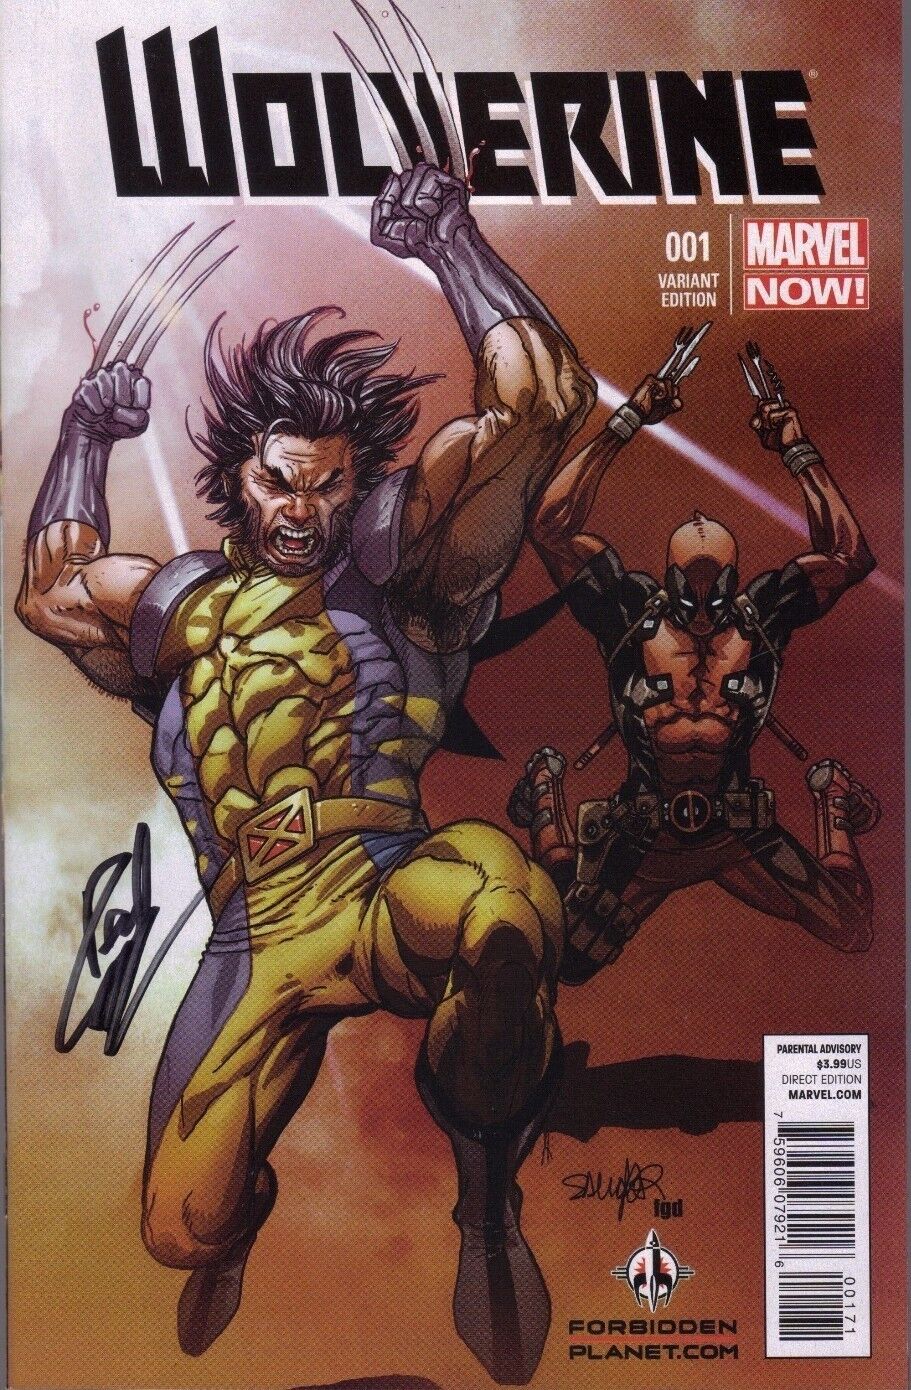 WOLVERINE 1 VOL 5 RARE FORBIDDEN PLANET VARIANT COVER SIGNED PAUL CORNELL NM